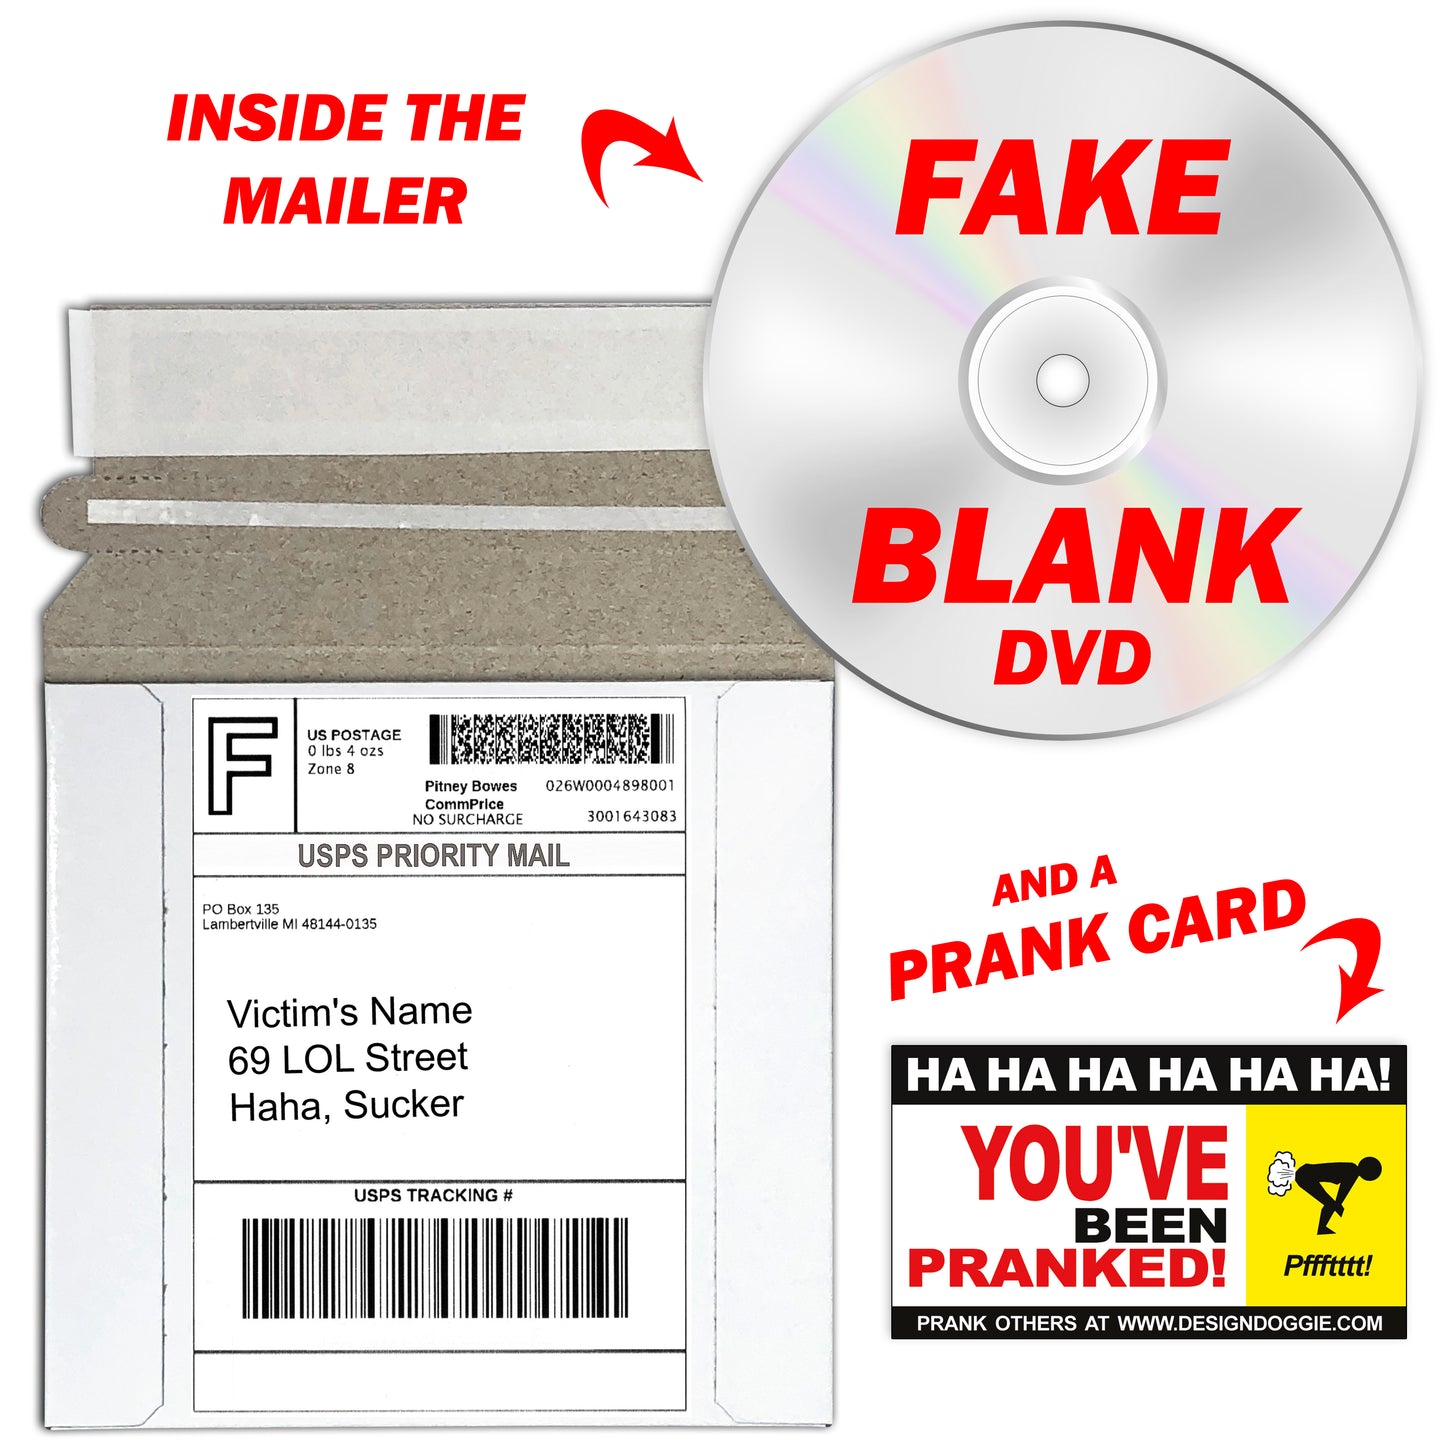 Mullets Fake DVD mail prank gets sent directly to your victims 100% anonymously!